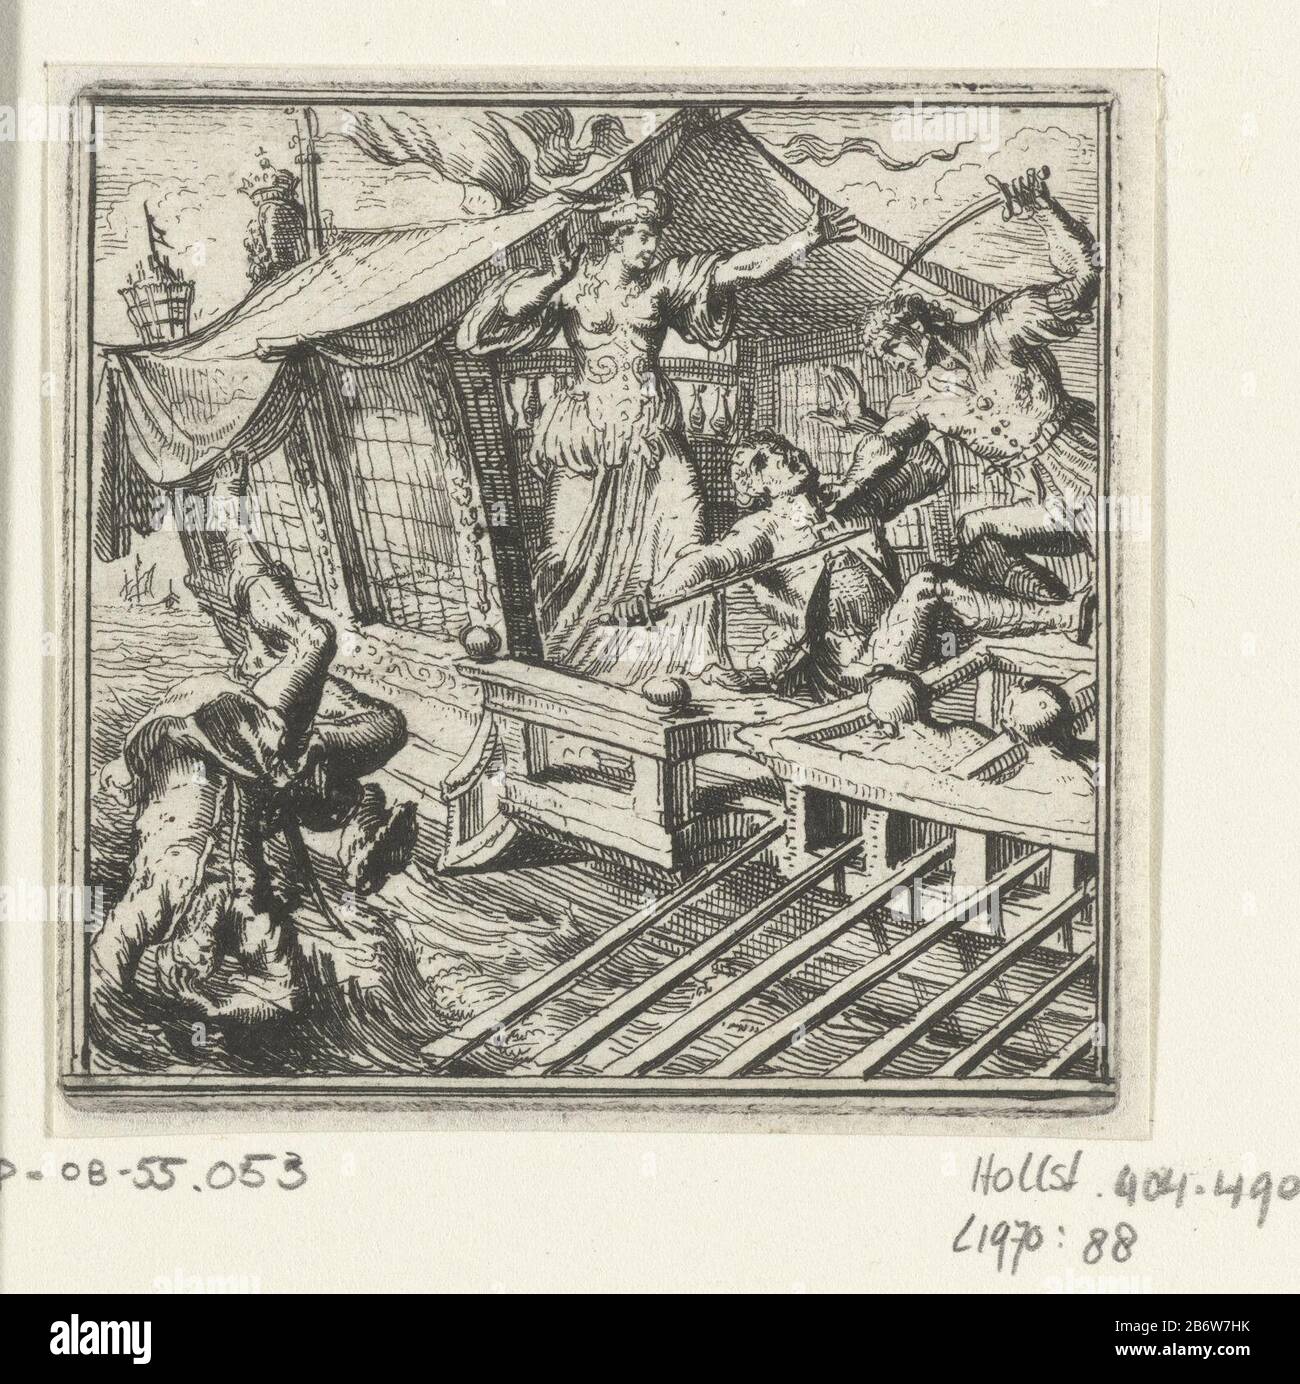 Illustratie voor de Decamerone van Boccaccio Illustration for the Decameron  of Boccaccio, history XVII. Boat with two men fighting and a wife (daughter  of Beminedab). A third man falls in the water.